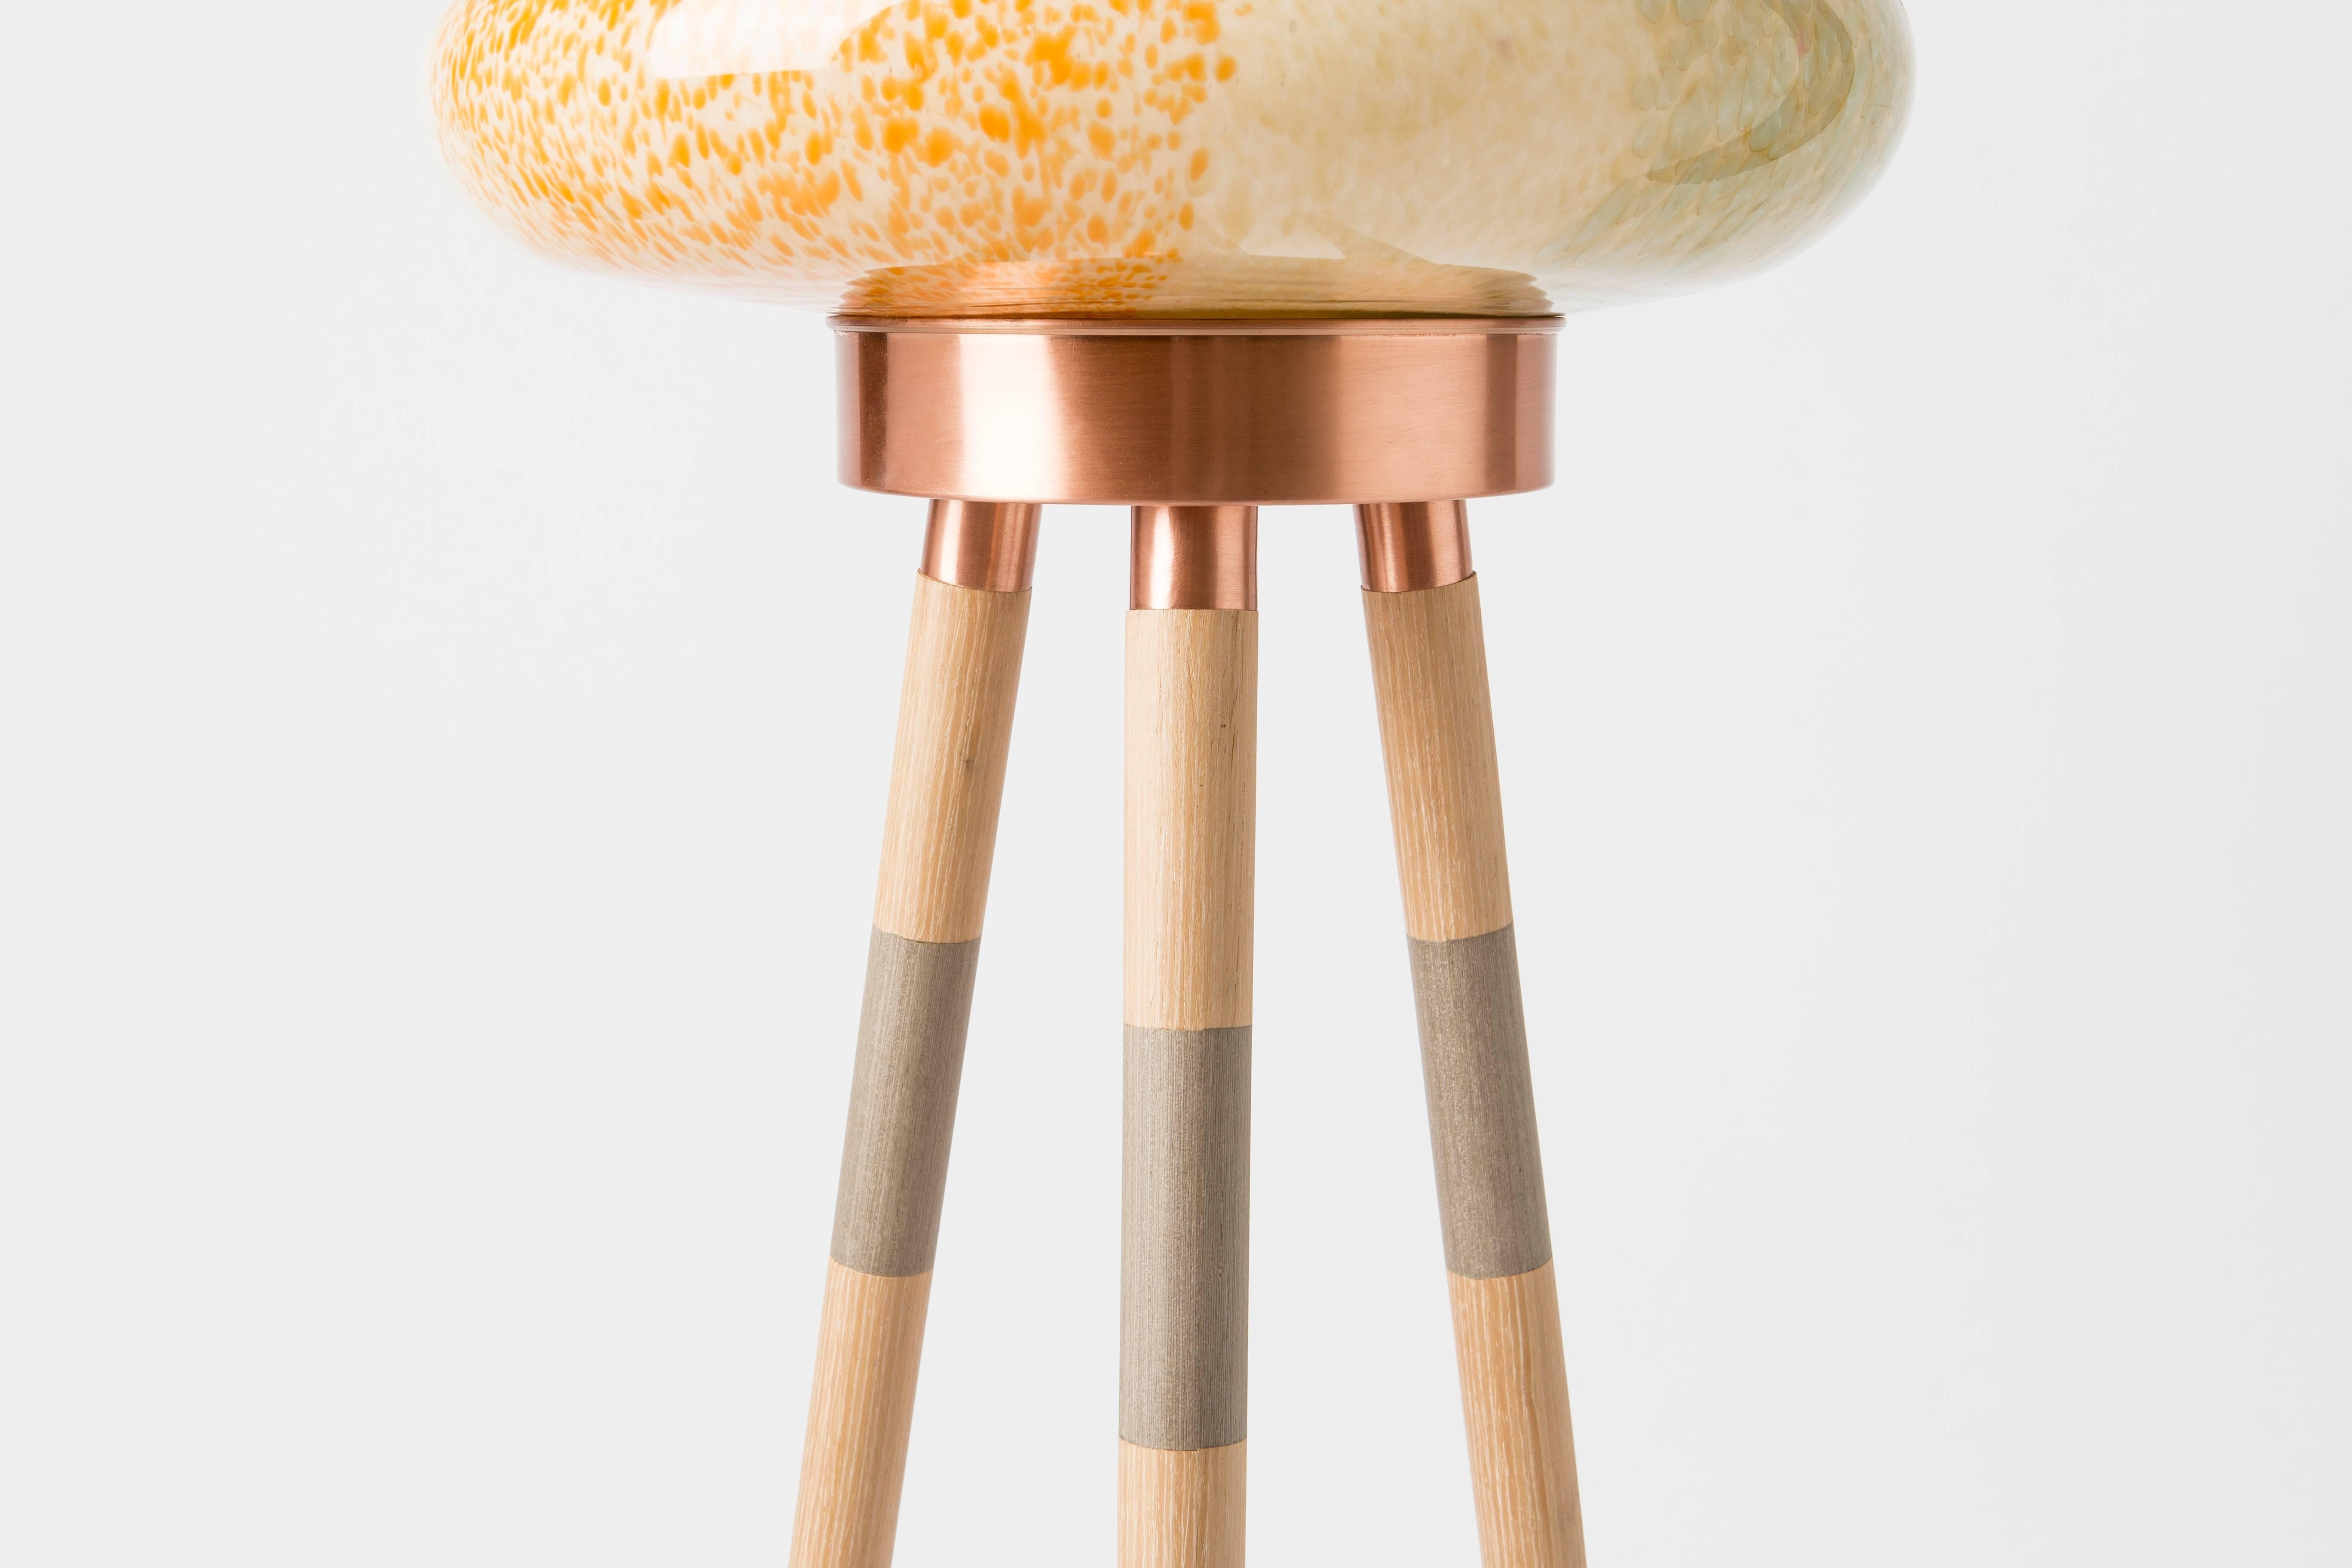 This beehive inspired floor lamp comprises a mixed colored hand blown glass shade and different combinations of wood veneer legs and copper. The light is adjustable by the dimmer. 

Materials: hand blown colored glass lampshade, polished copper